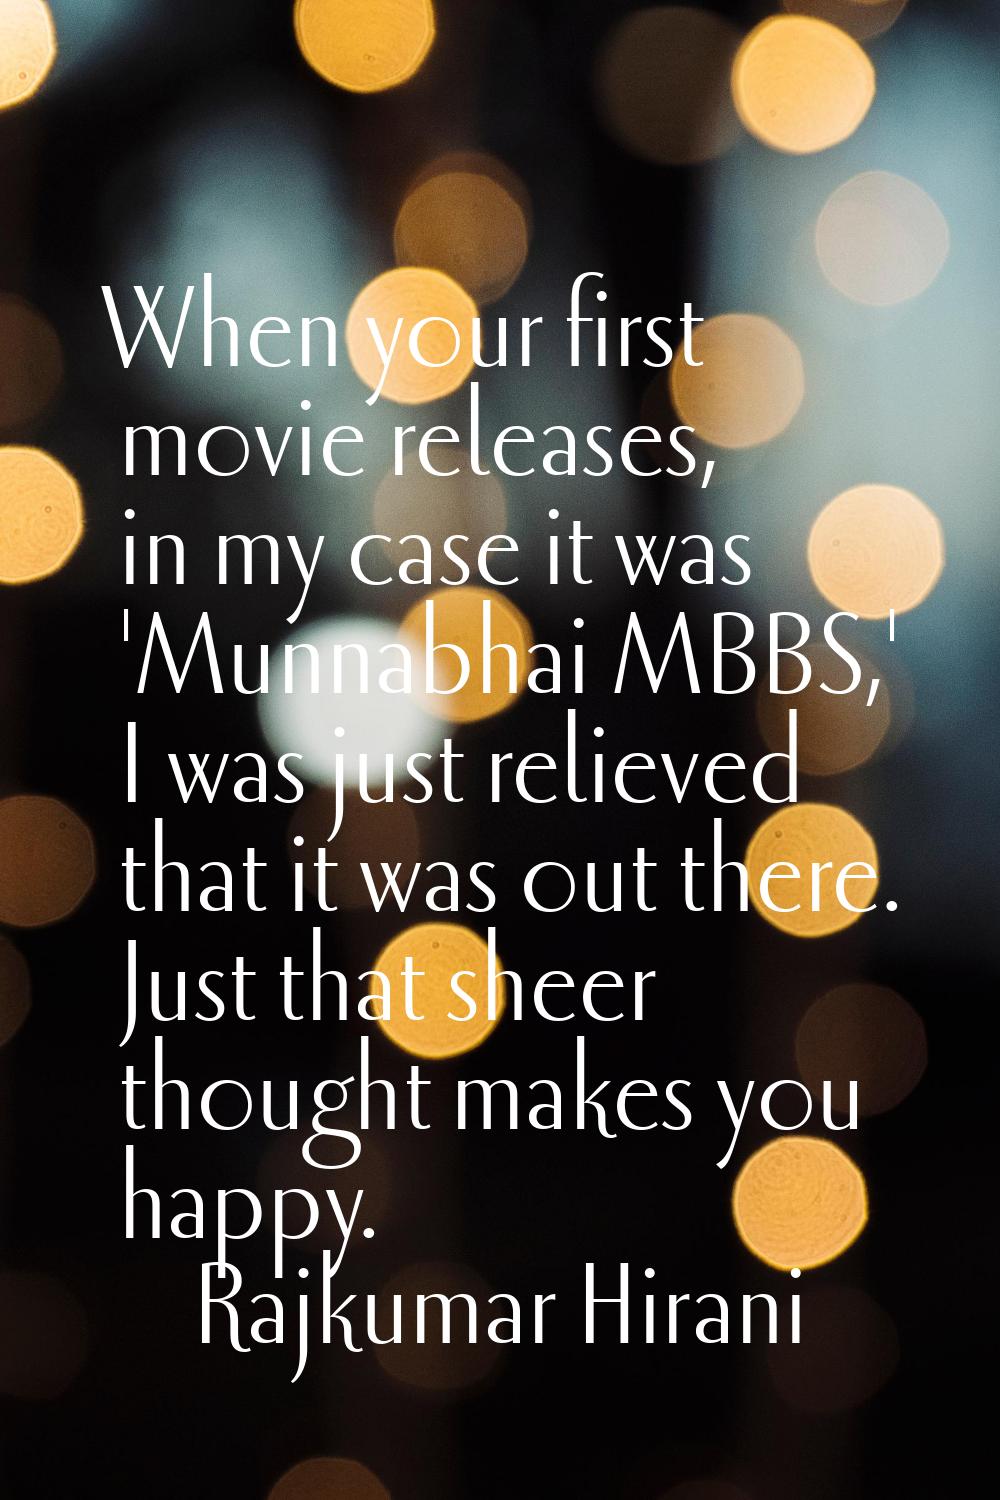 When your first movie releases, in my case it was 'Munnabhai MBBS,' I was just relieved that it was